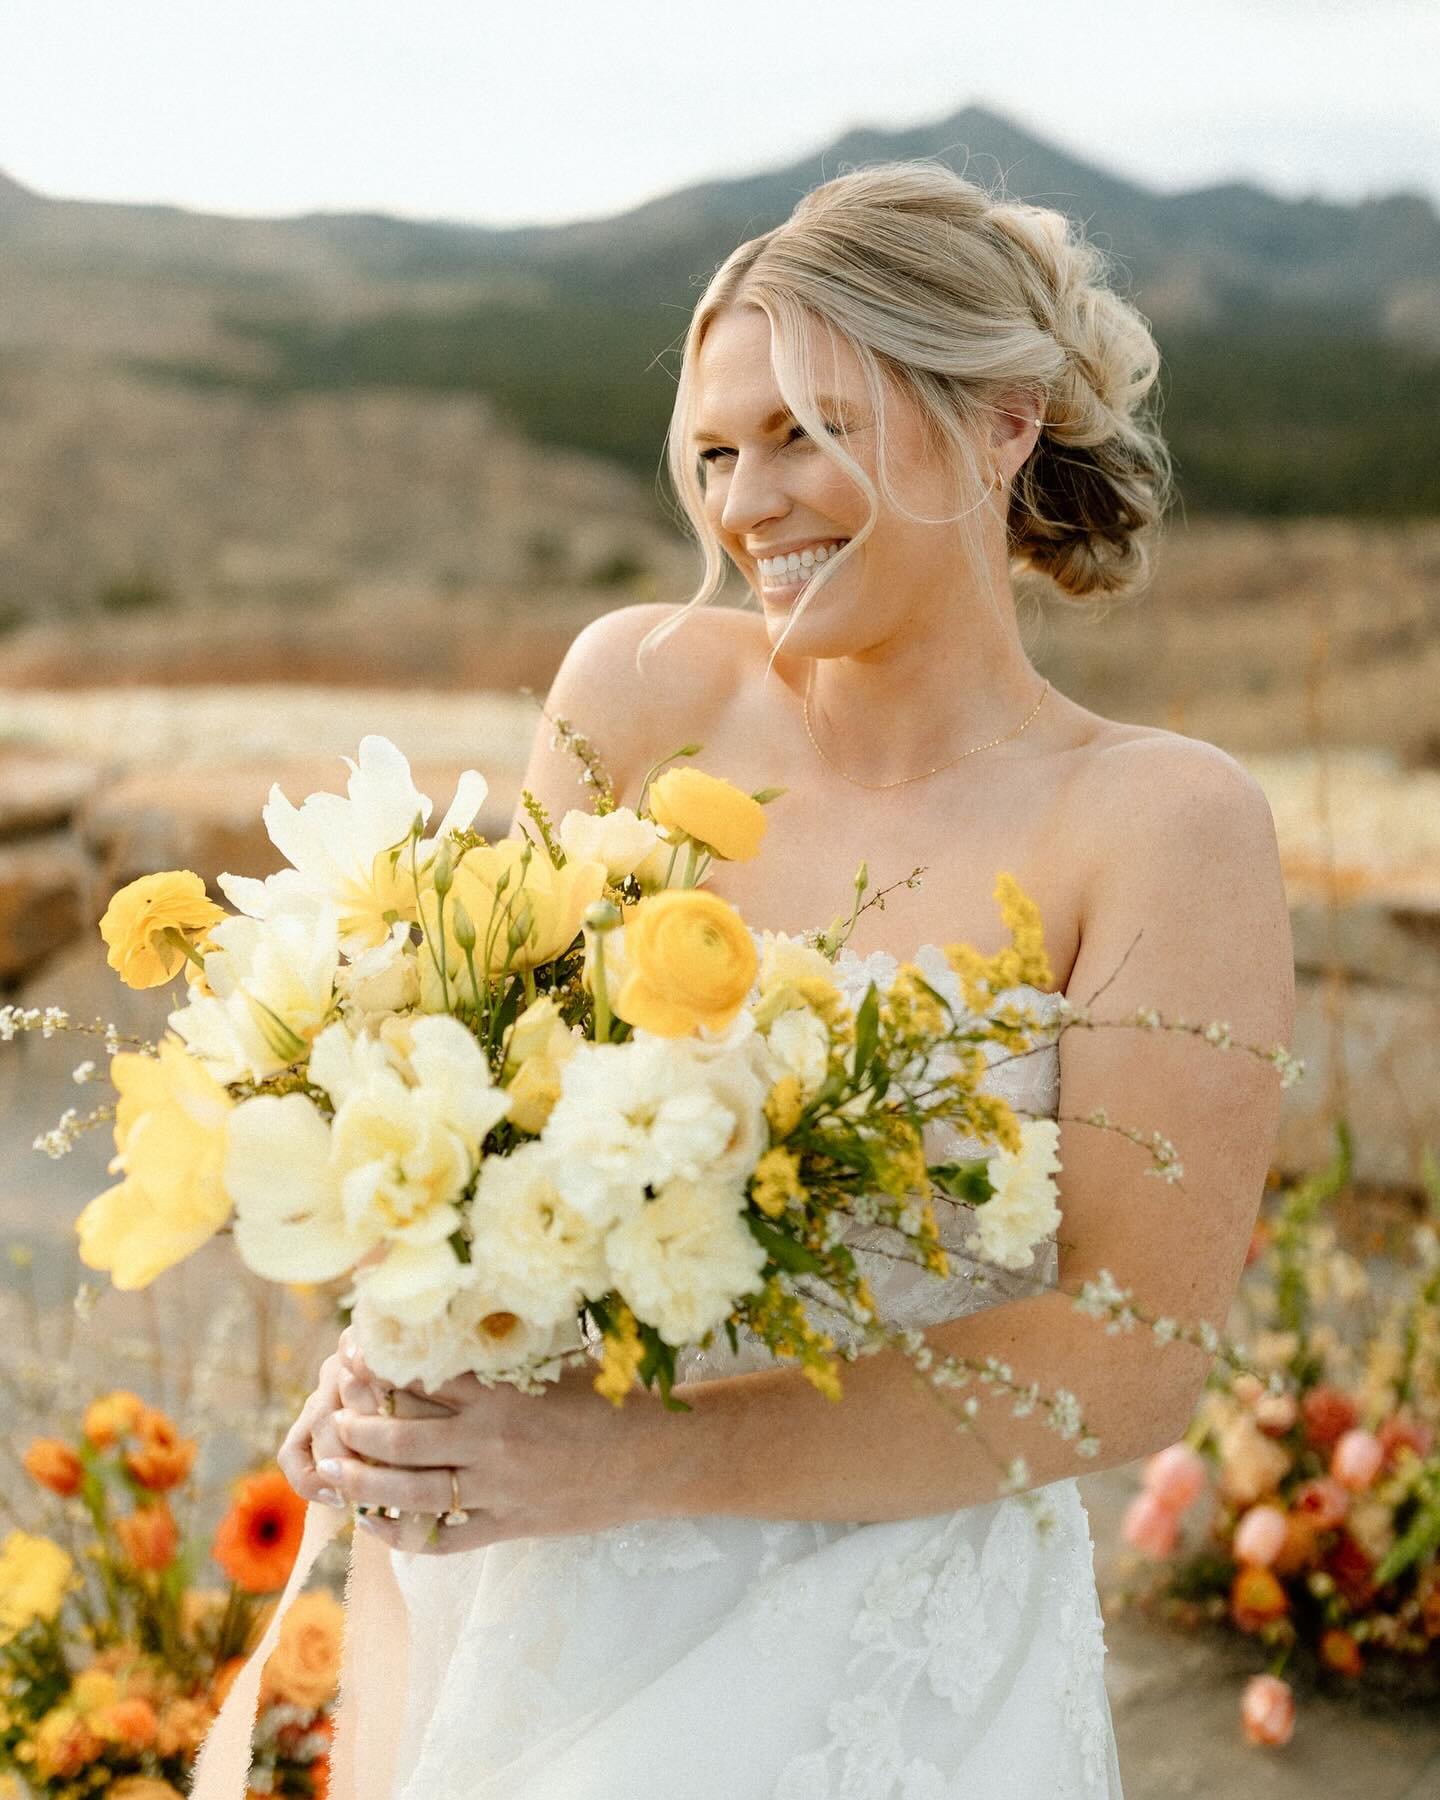 Not sure you can tell, but we&rsquo;re pretty into yellow this season 🌼

. . .
Venue | @pikespeakranch 
Planning | @outwestevents 
Photographer | @mado.photo 
Florist | @provisionfloral 
Cake | @biteit.bakery 
HAMU | @beautykit_studio 
Bartenders | 